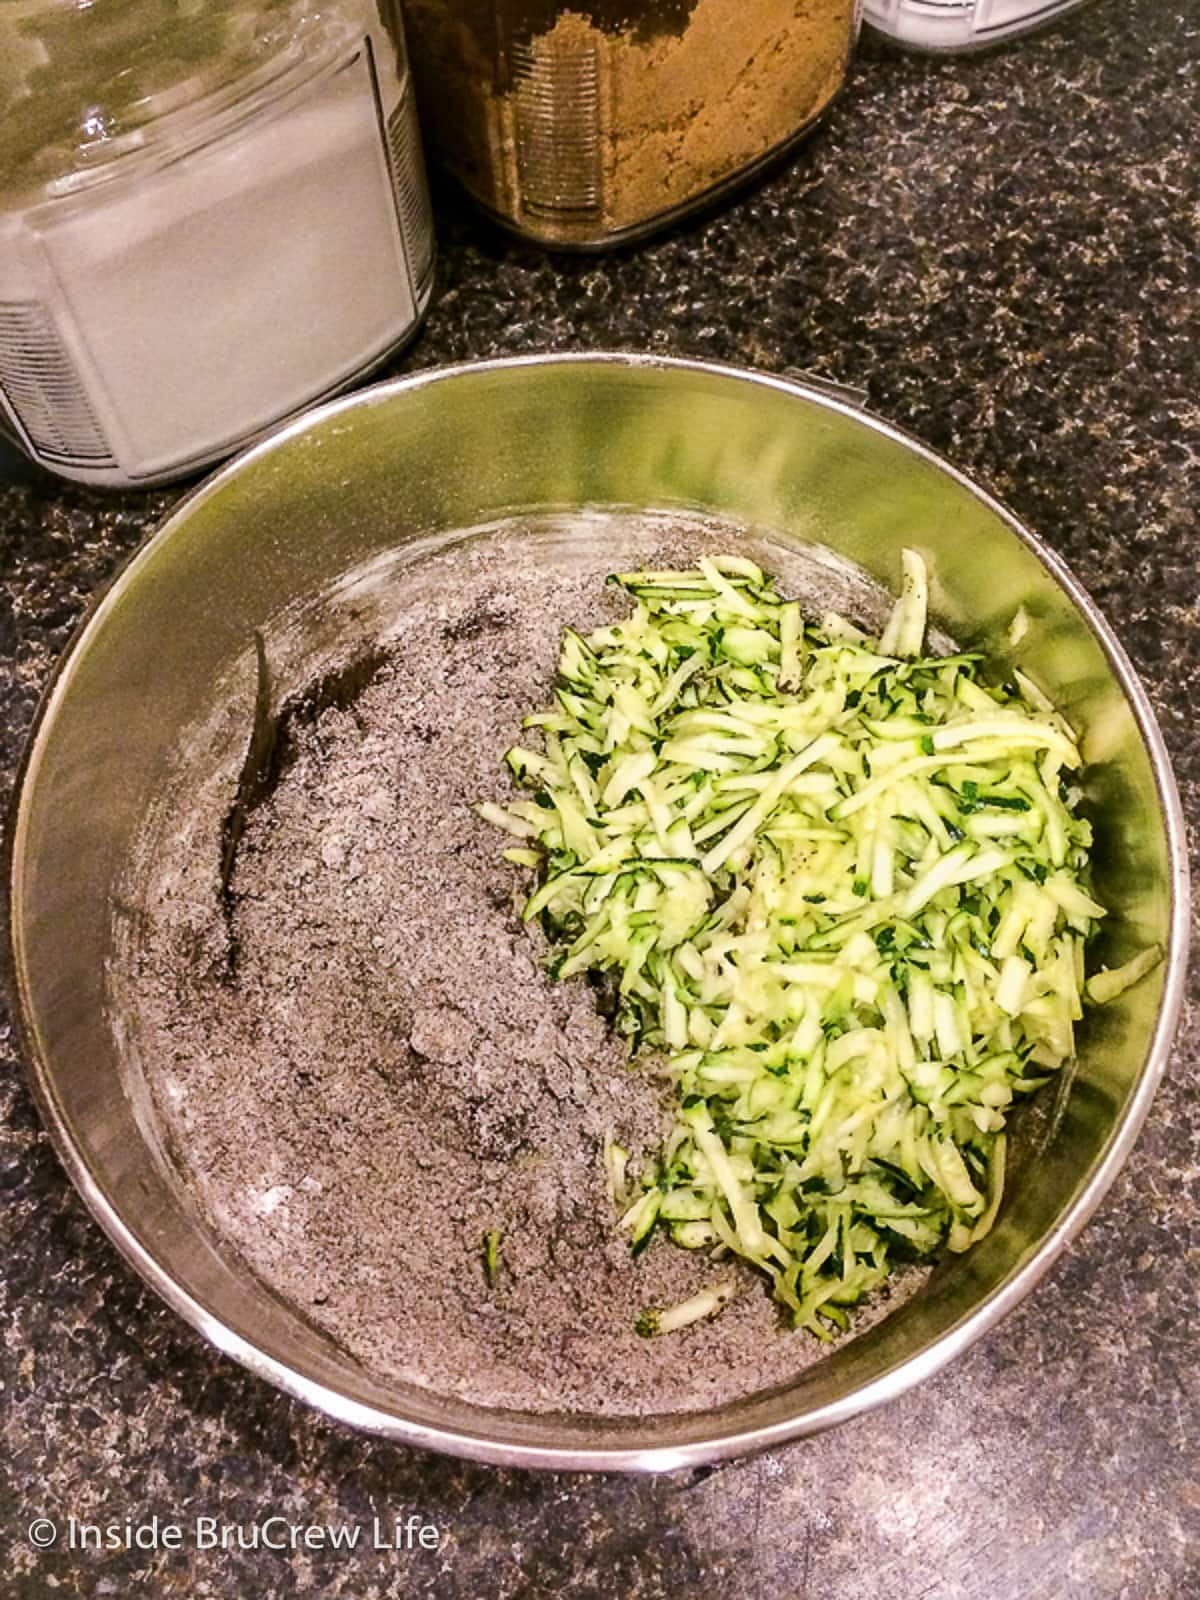 A metal bowl with ingredients needed to make a chocolate cake with shredded zucchini.